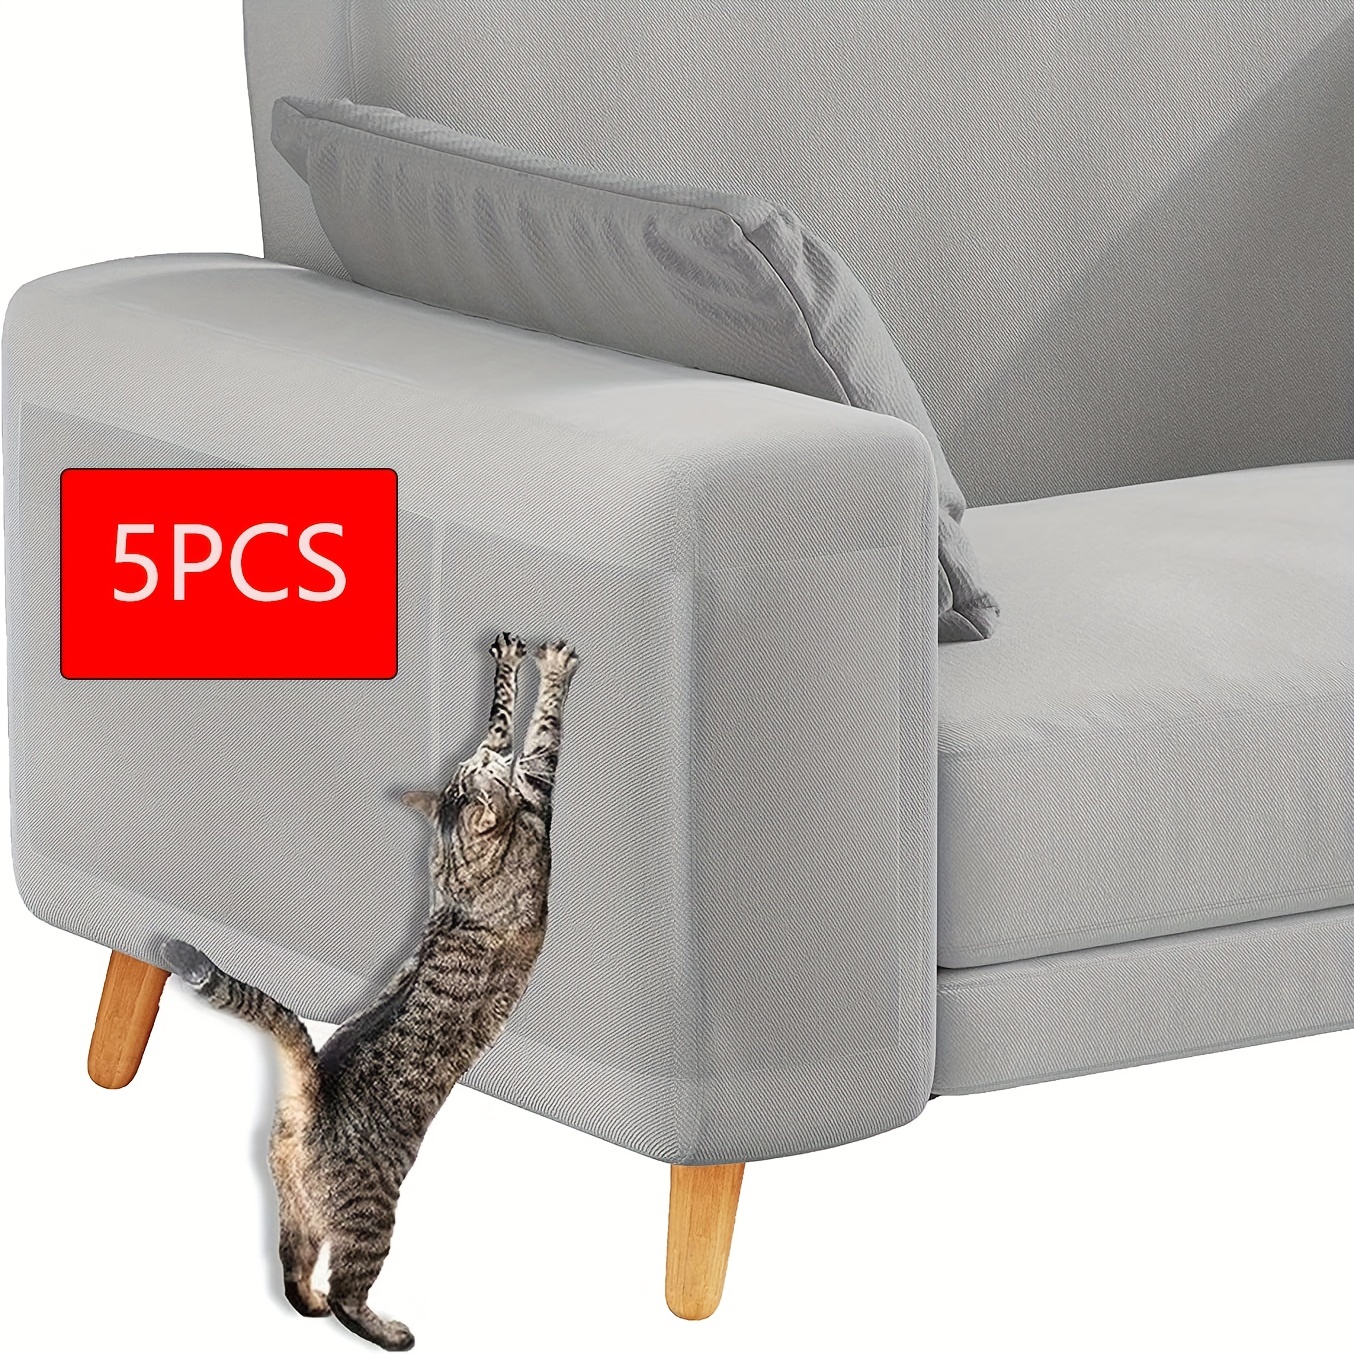 4pcs/lot Couch Cat Scratcher Tape Sofa Furniture Protector for Cats